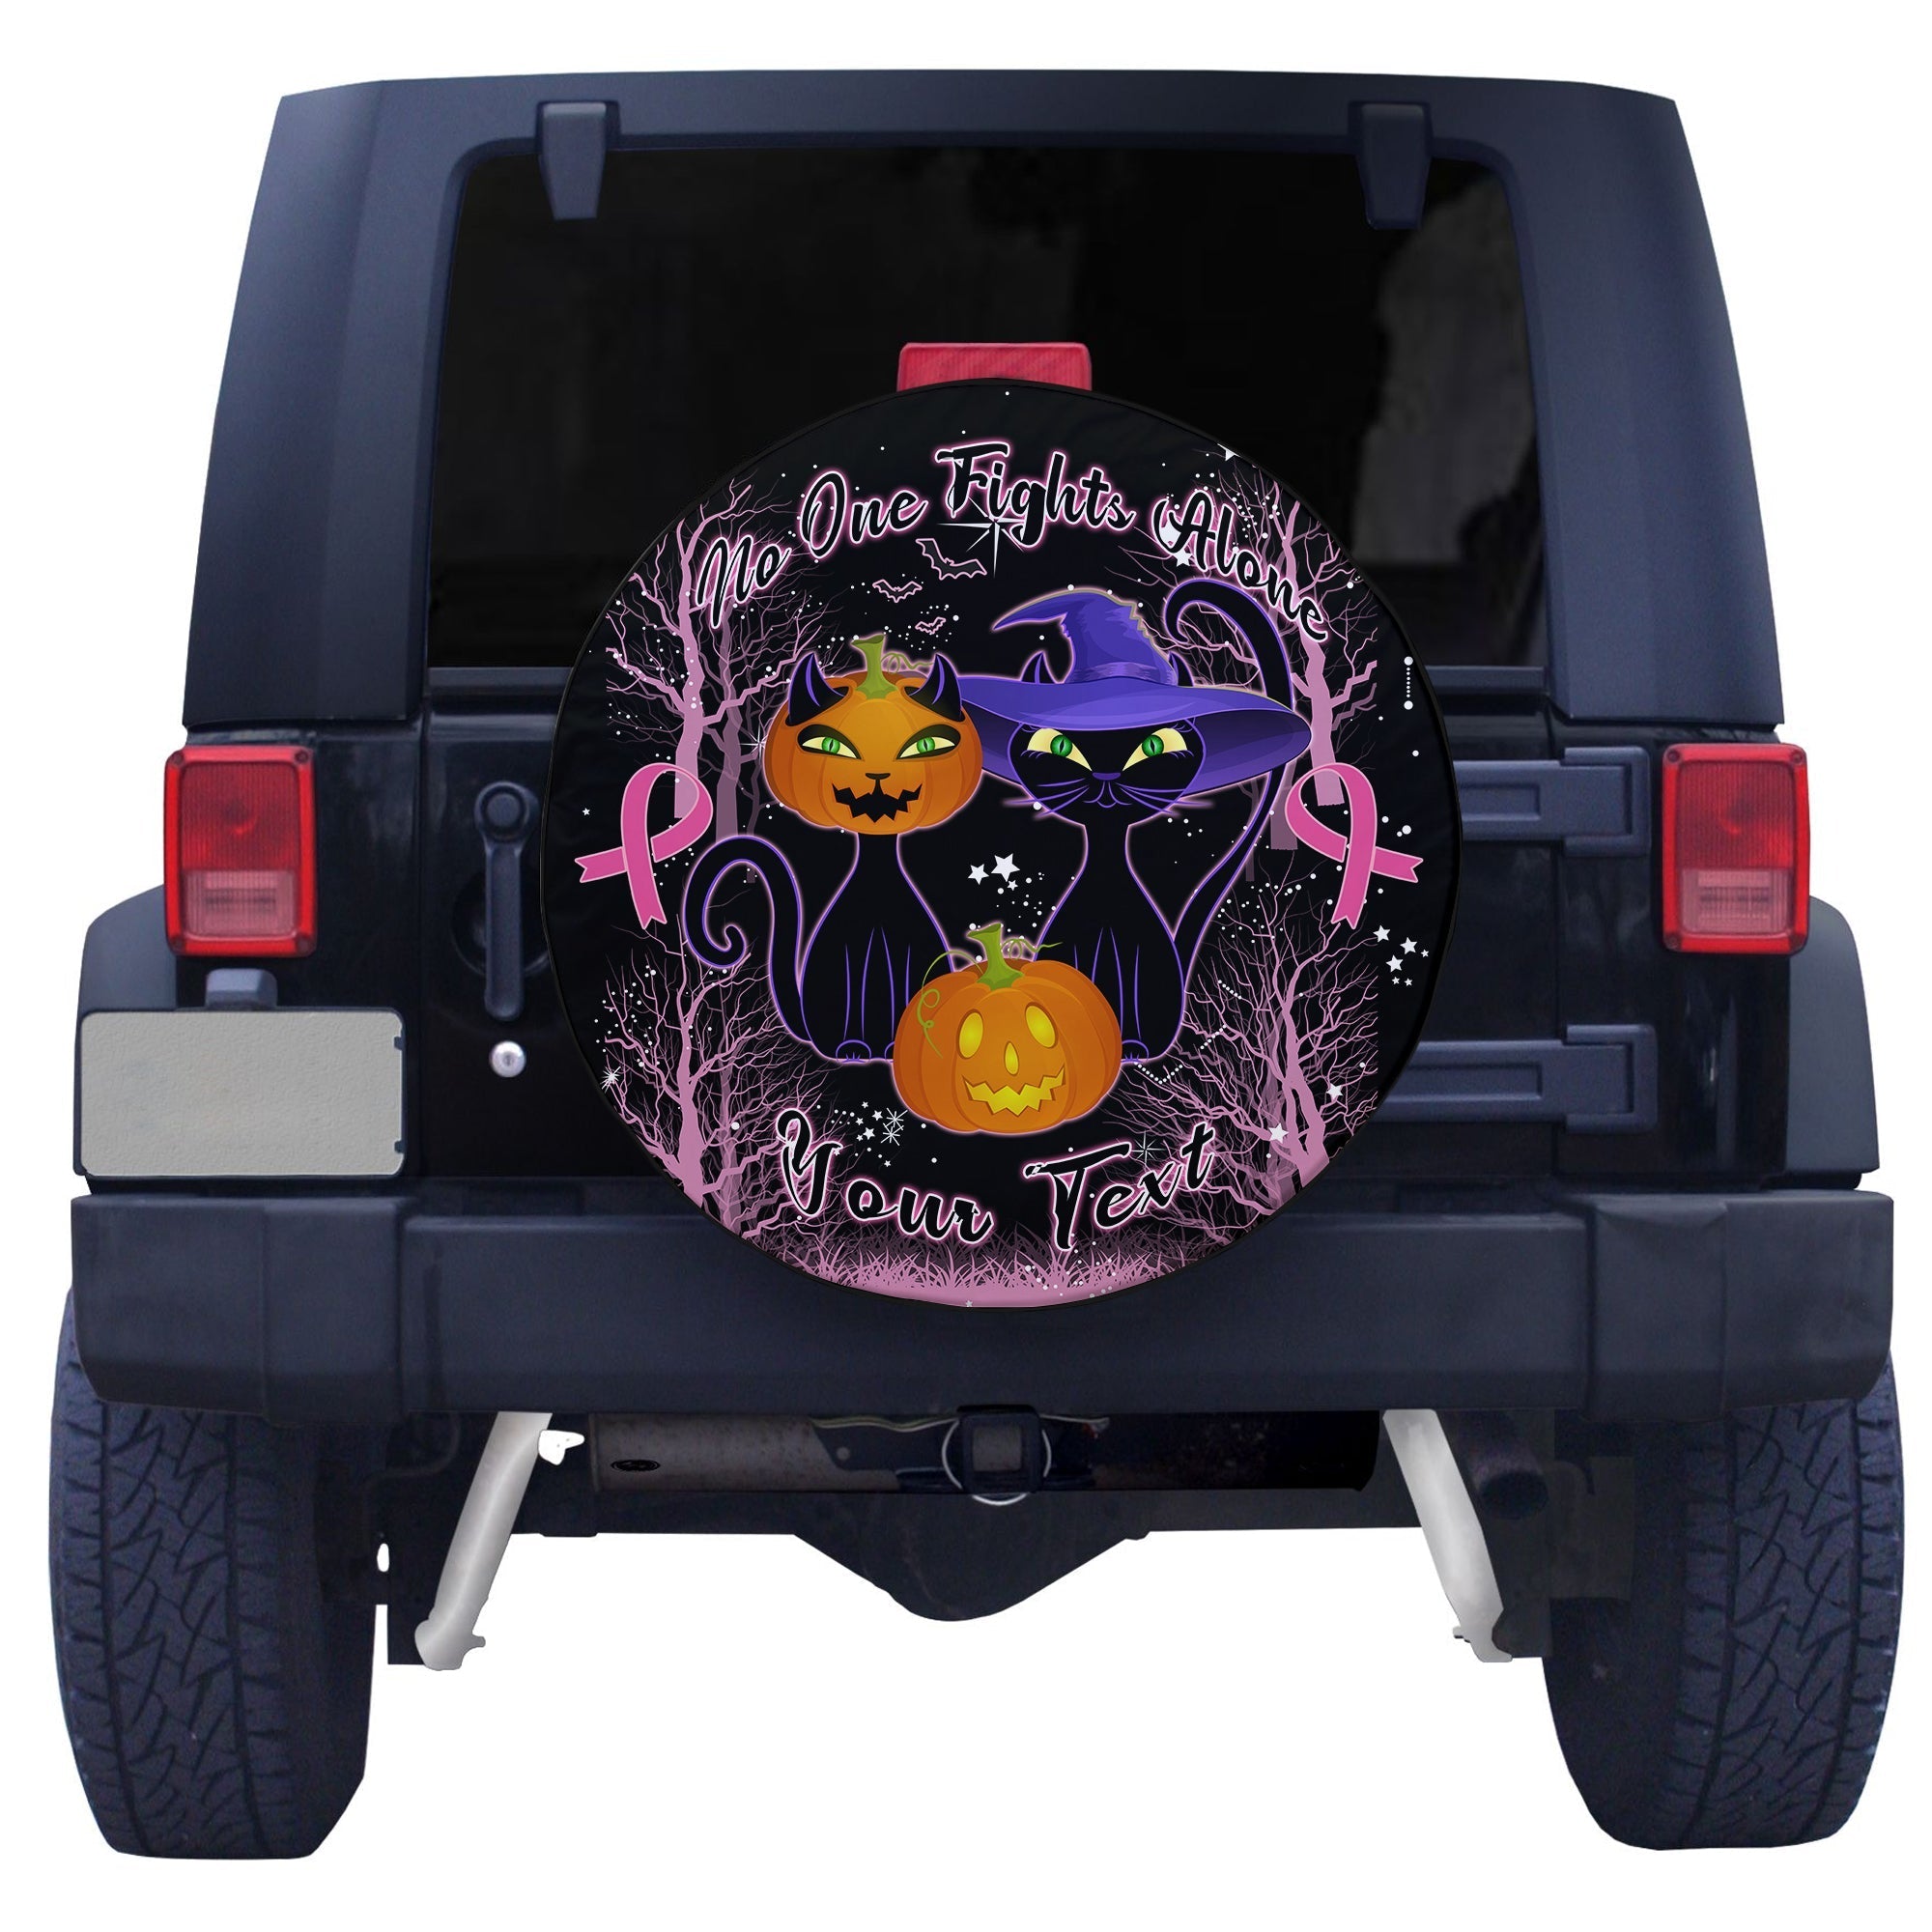 custom-personalised-breast-cancer-spare-tire-cover-no-one-fights-alone-black-cat-halloween-in-dark-forest